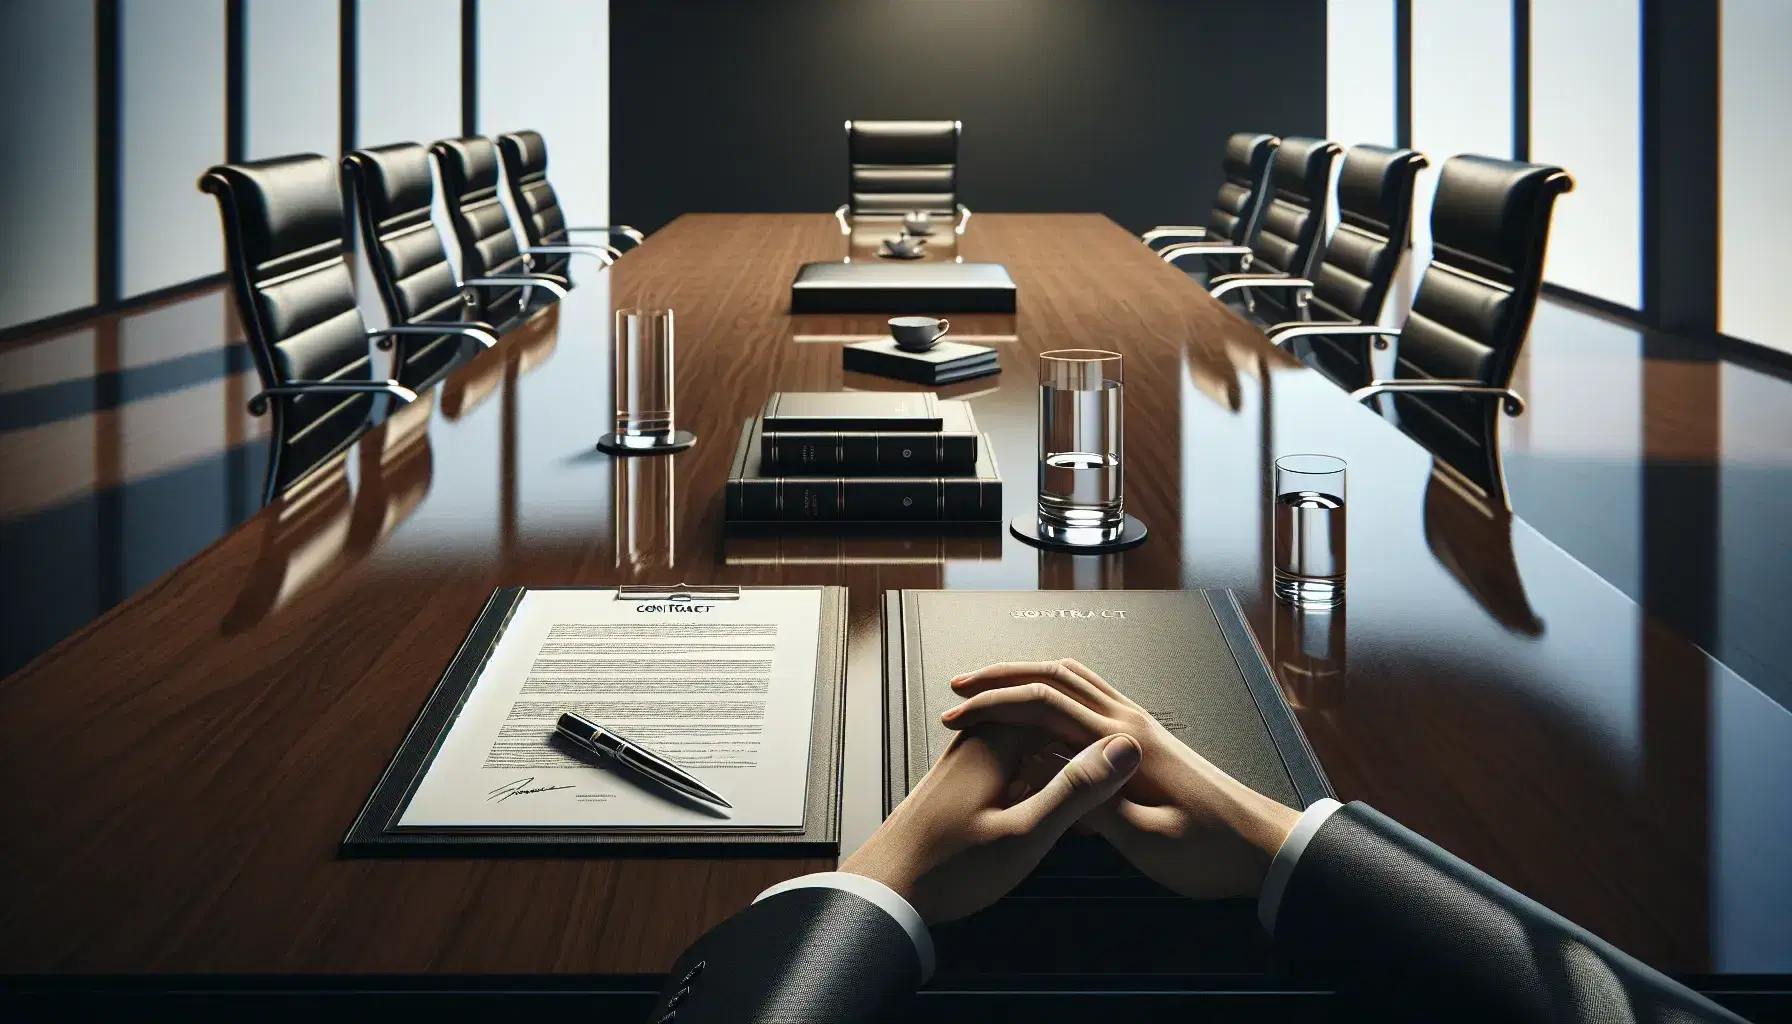 Hands clasped in thought over a polished conference table with documents, a silver pen, a water pitcher, and a glass in a professional meeting room setting.